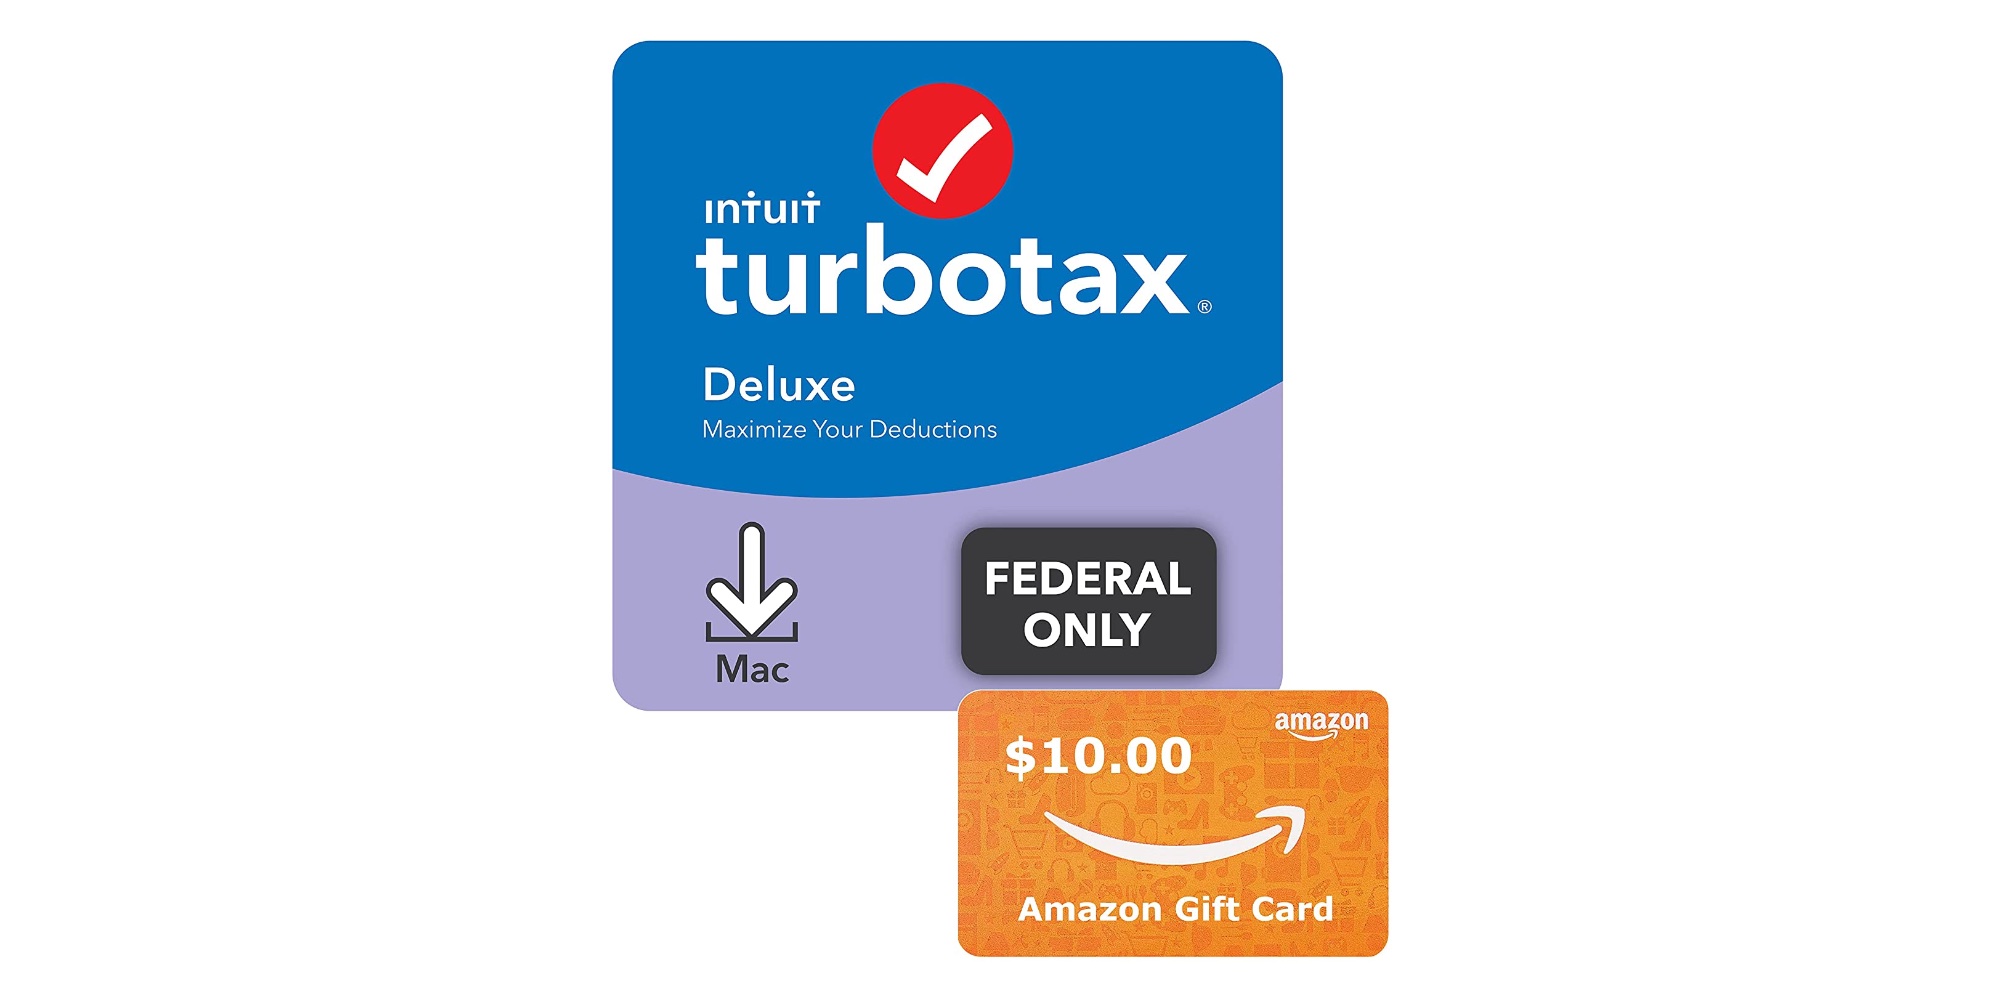 Bundle TurboTax Deluxe 2021 for Mac/PC with a free 10 Amazon gift card